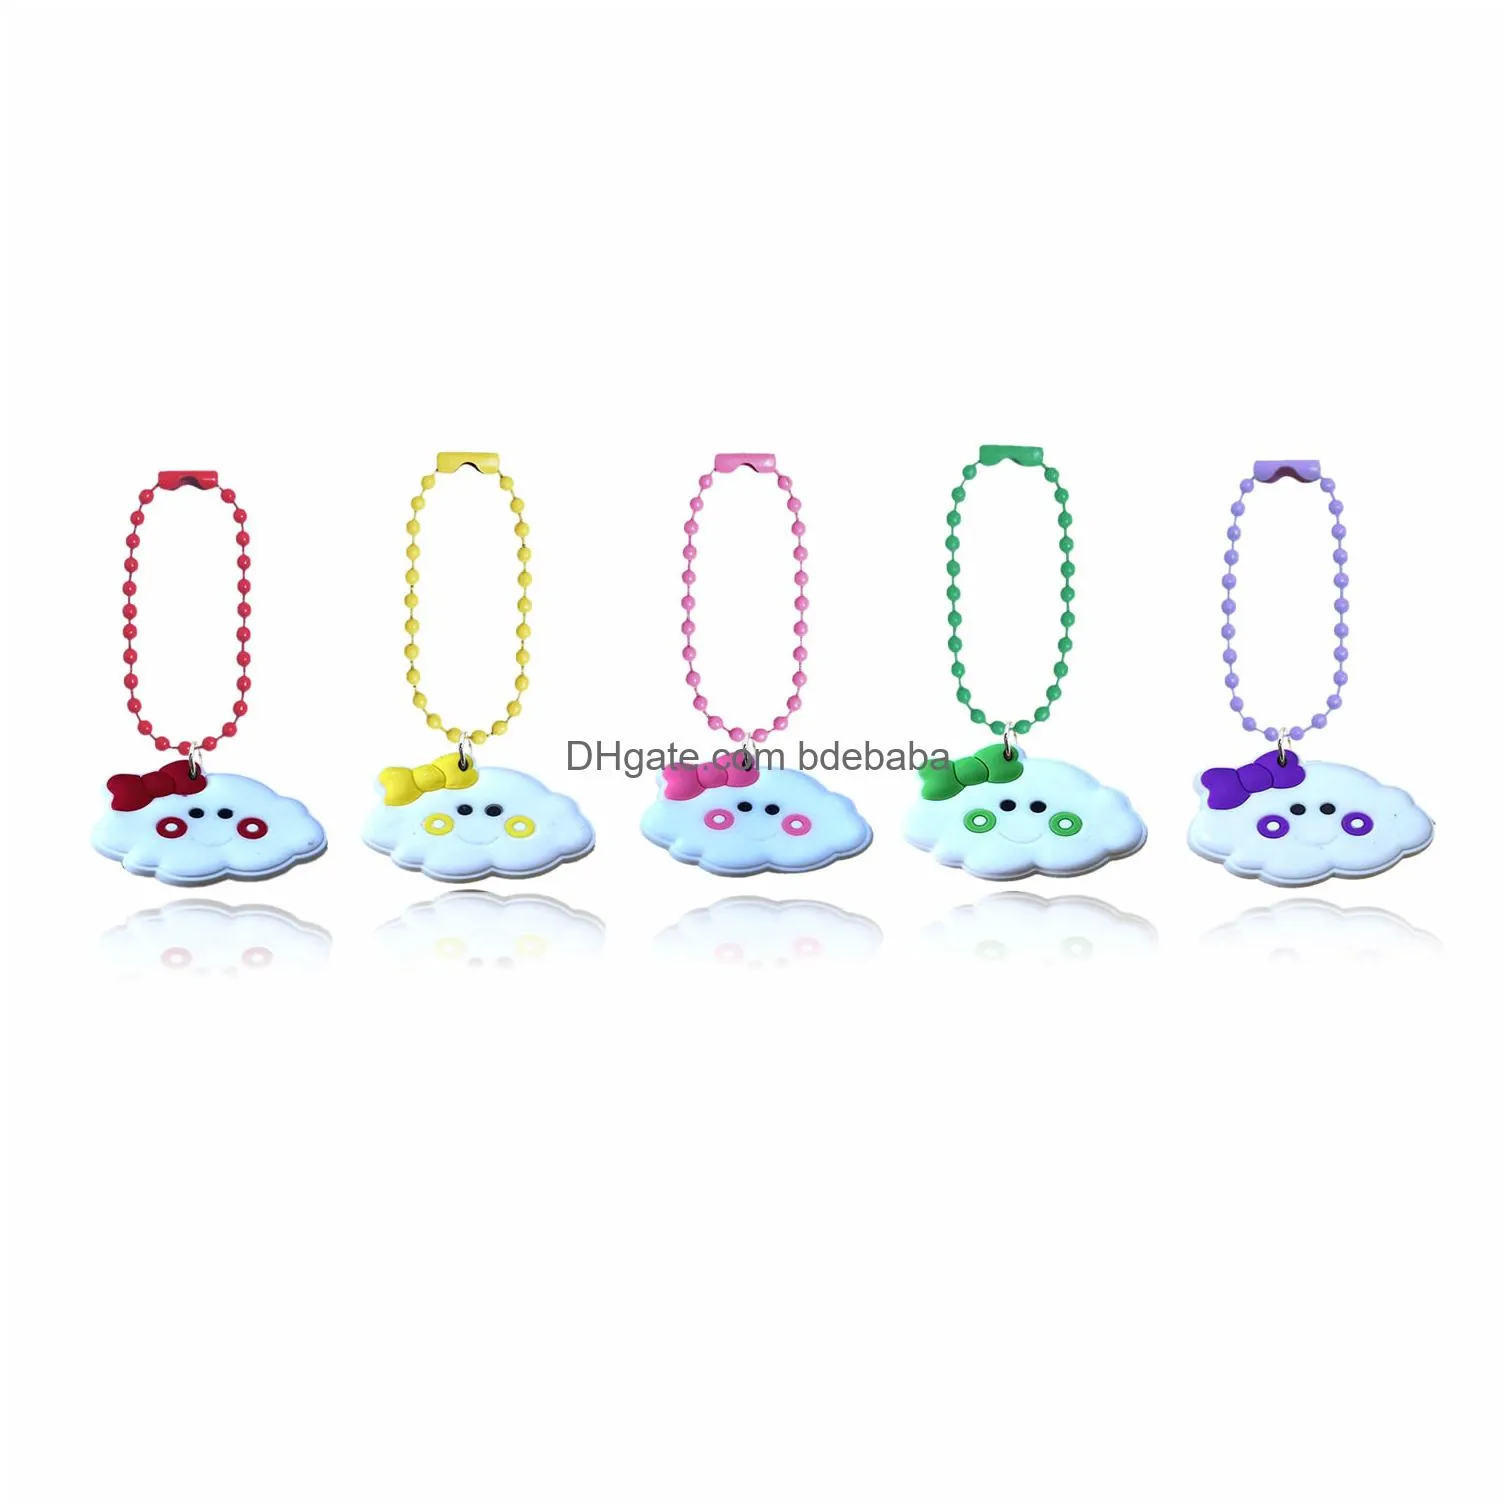 10pcs cartoon clouds keychain colorful ball bead keychains fits bag key dolls label hand tag for unisex